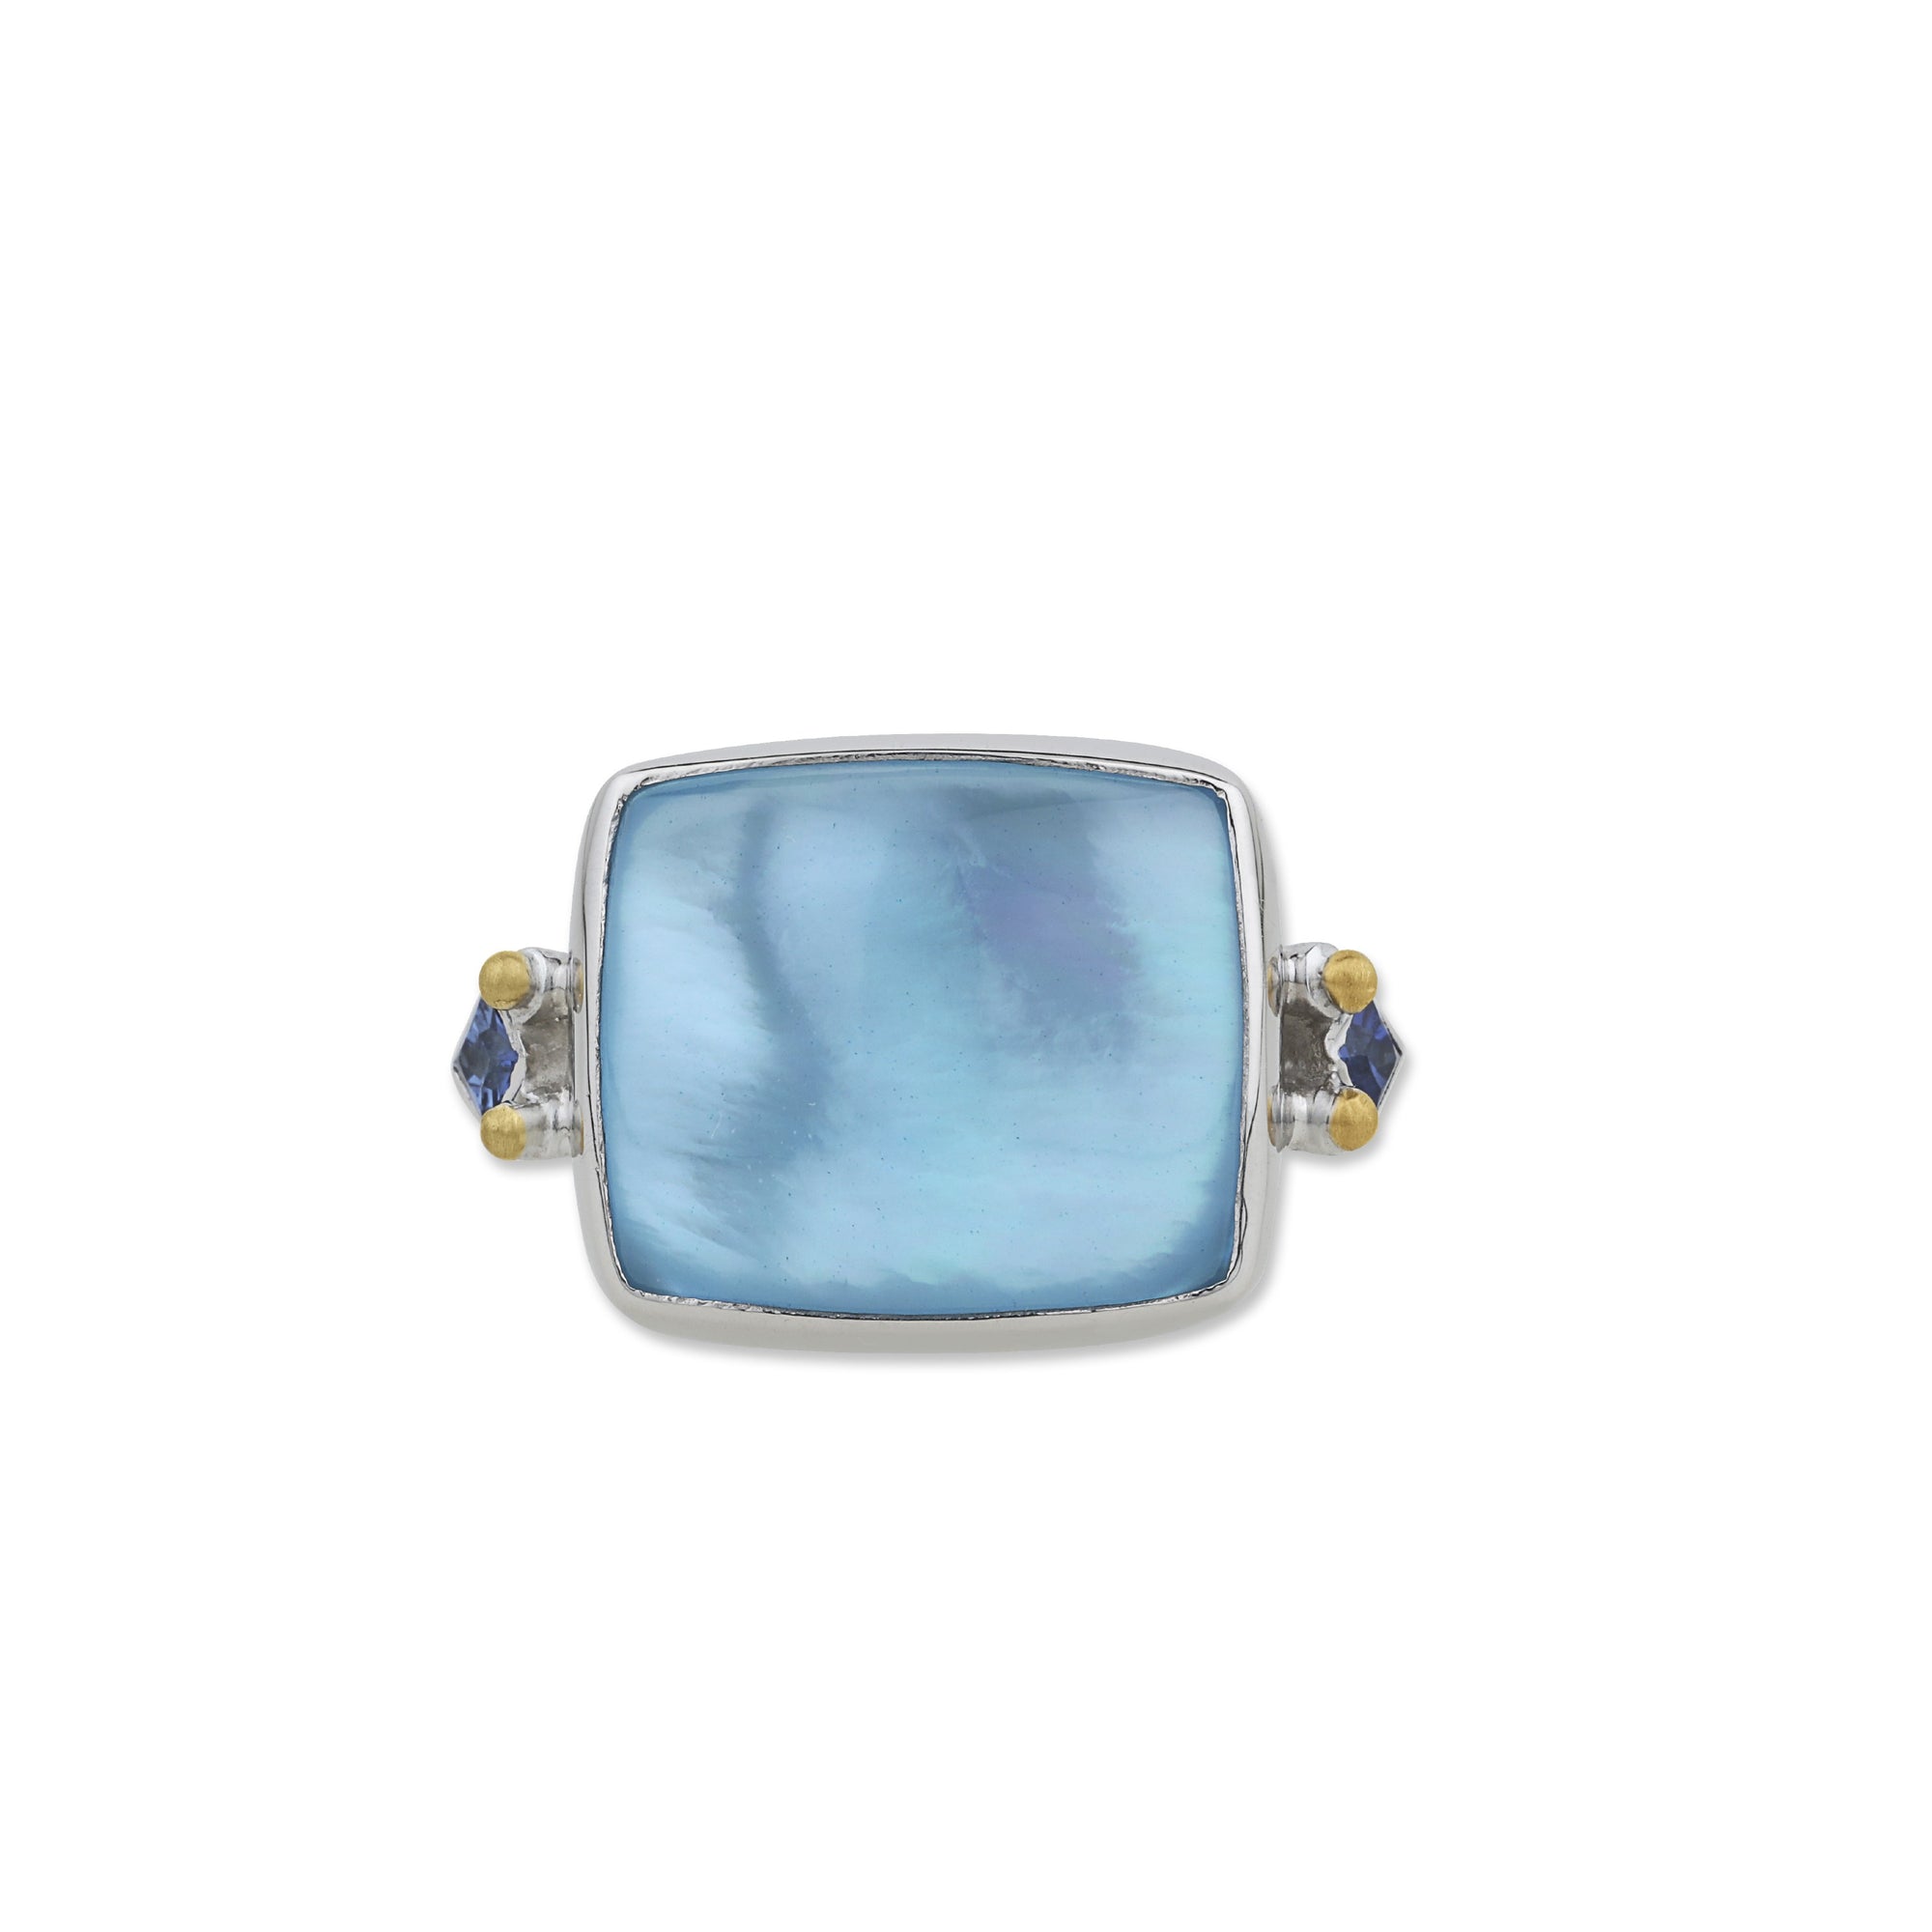 Lika Behar 24K & Sterling Silver “Kami” Ring with Cabochon Blue Topaz and Mother of Pearl Doublet